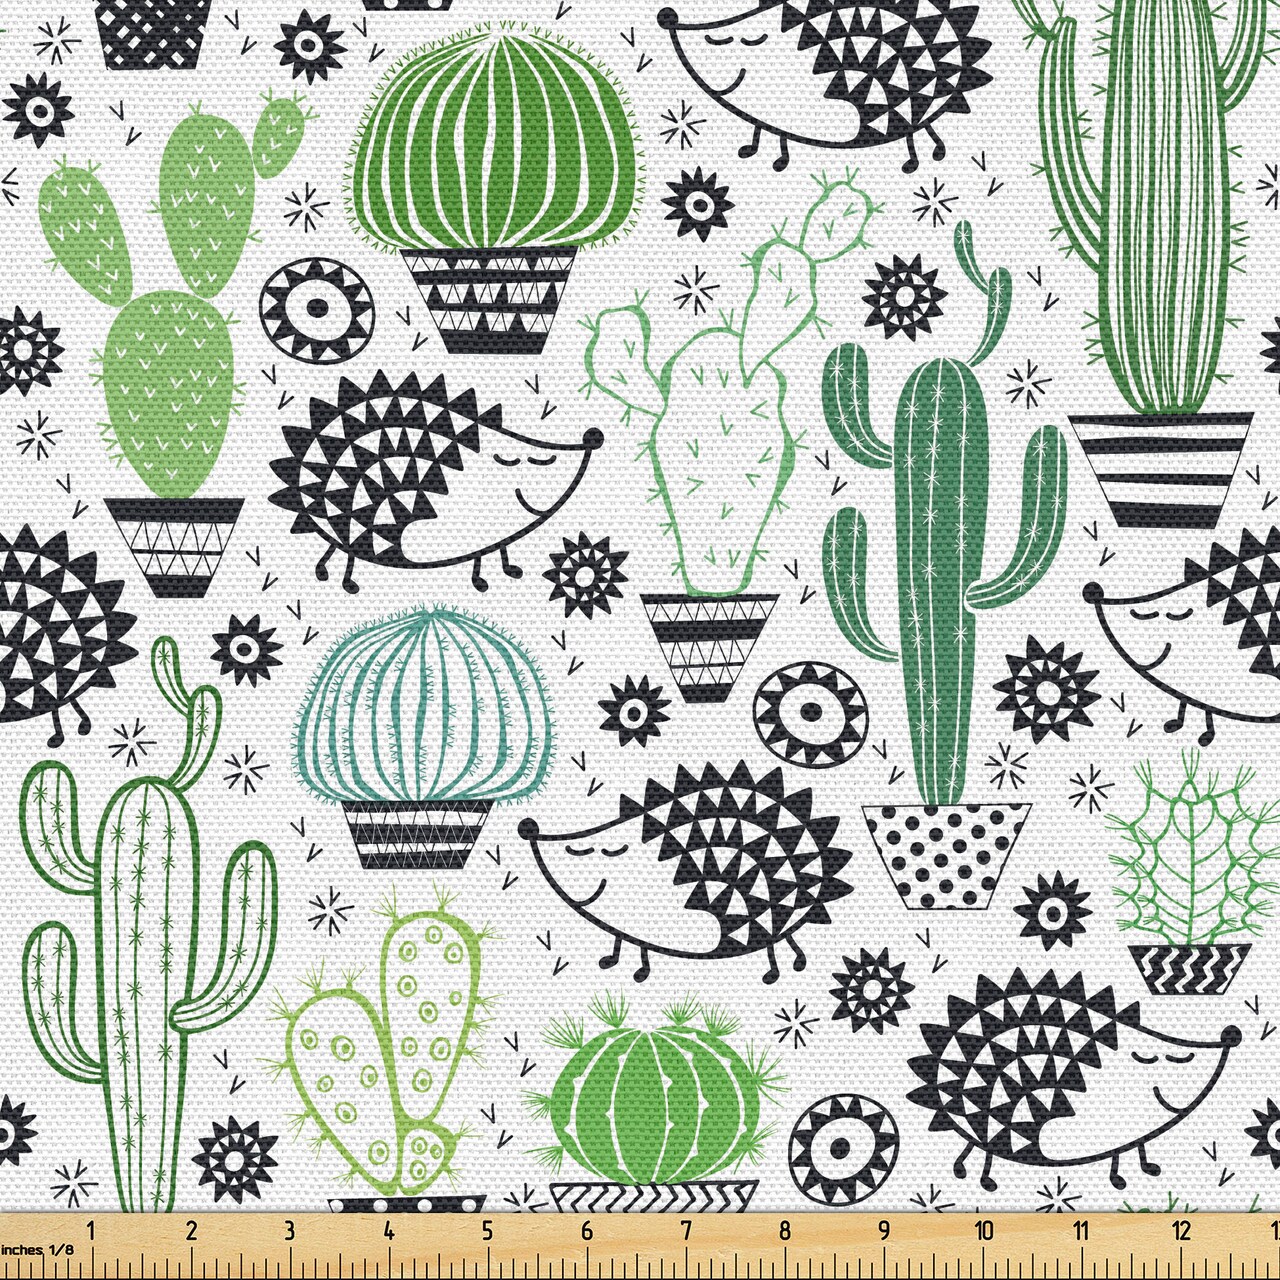 Ambesonne Cactus Fabric by The Yard, Cartoon Style Inspired Drawing of Hedgehog Animals Saguaro and Prickly Pear, Decorative Fabric for Upholstery and Home Accents, White Green